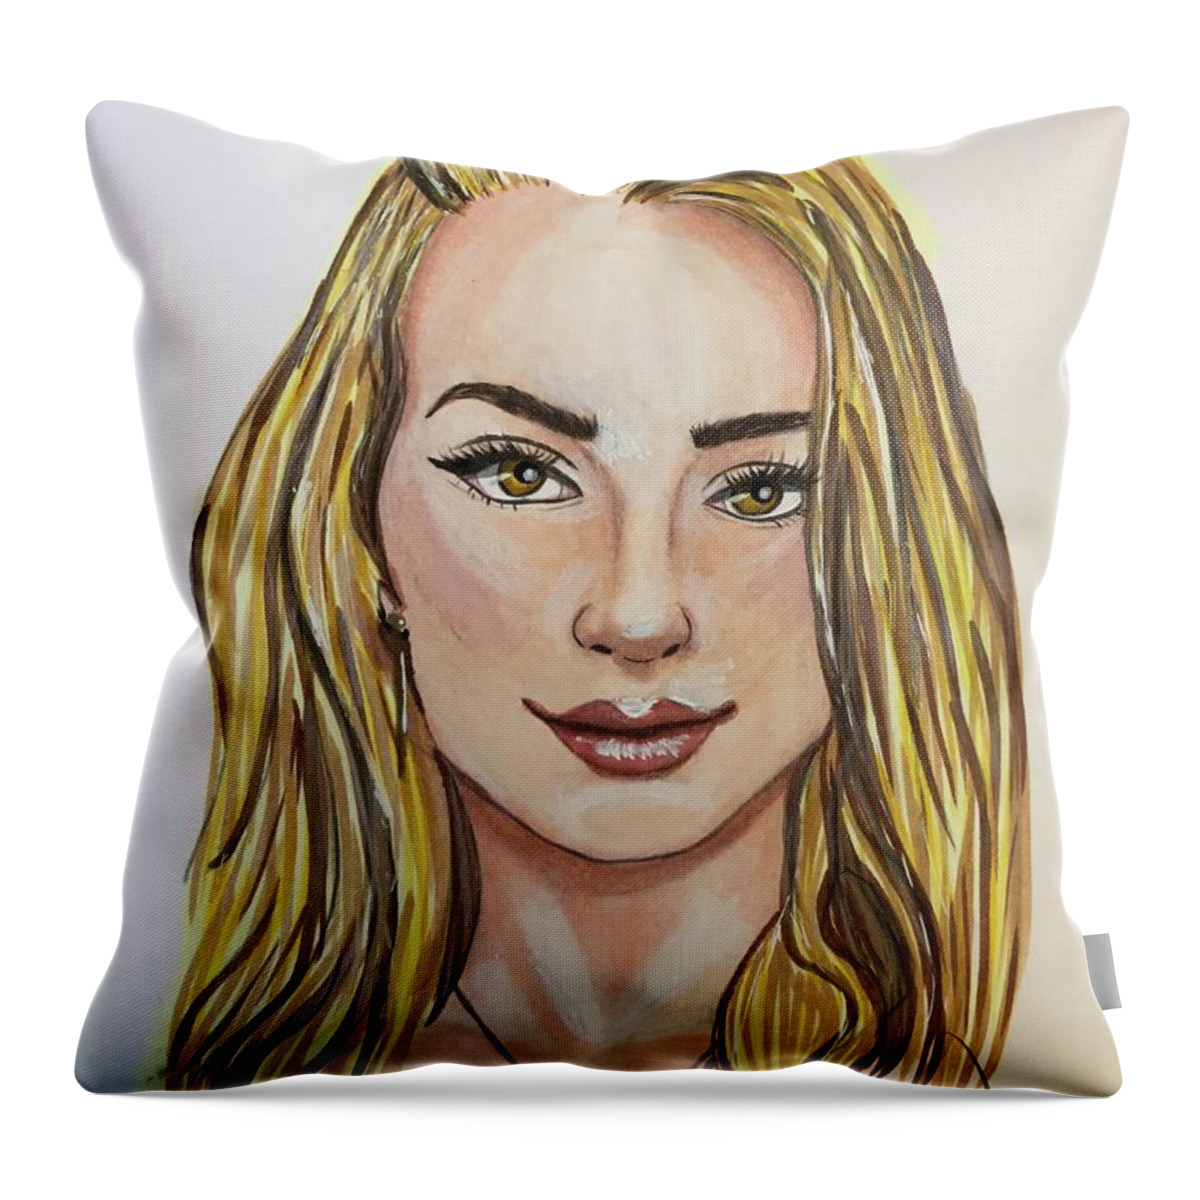 Mor Throw Pillow featuring the drawing Mor by Rebecca Wood